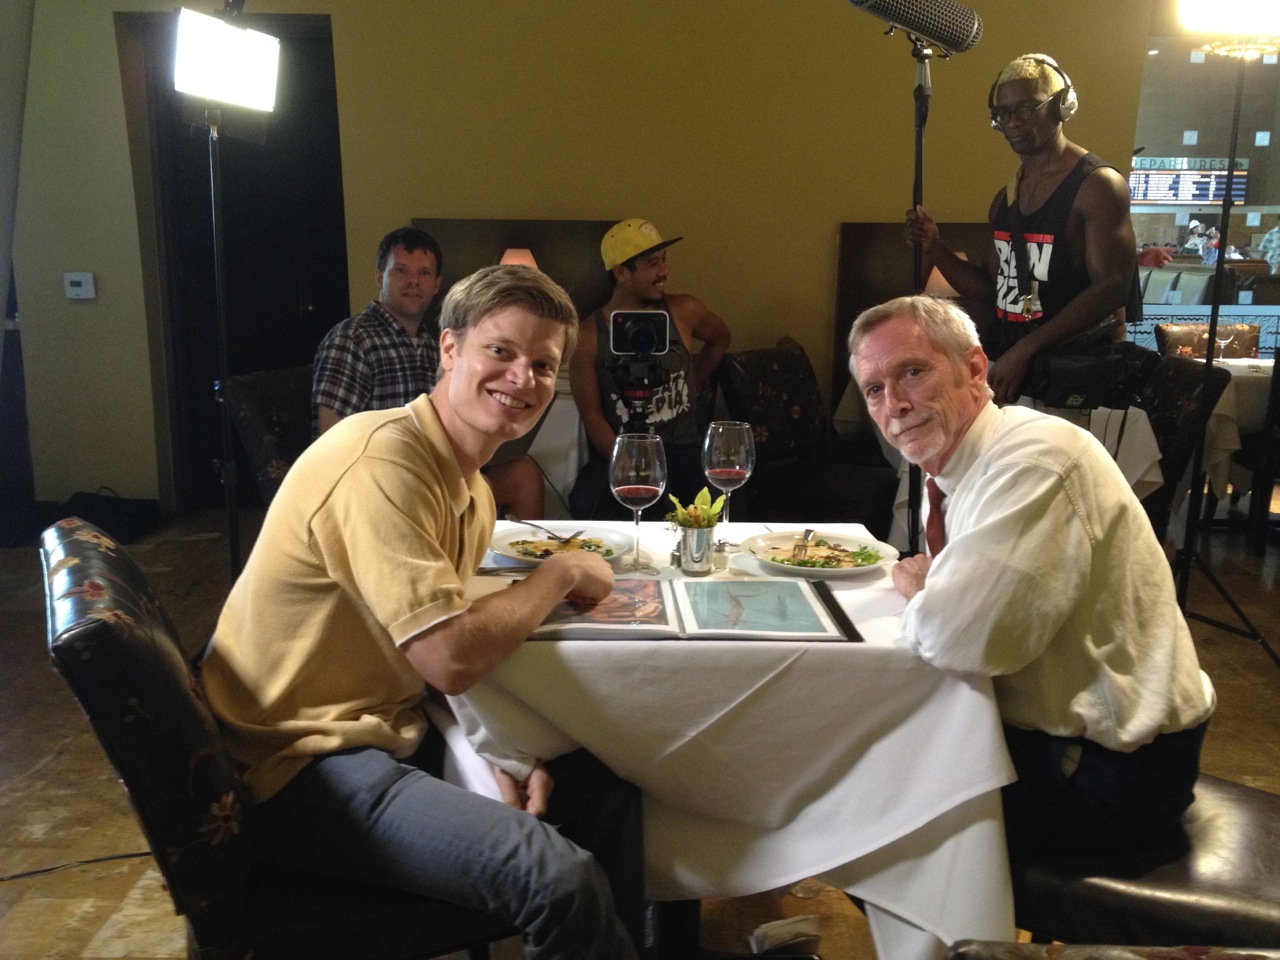 Greg Lucey on the set of ARTISTIC VENTURE with the hilarious Carl Petersen. Produced by Well Dang Productions. In the background (left) is writer/director Alex Wroten, and on sound is Charlie Harmony.